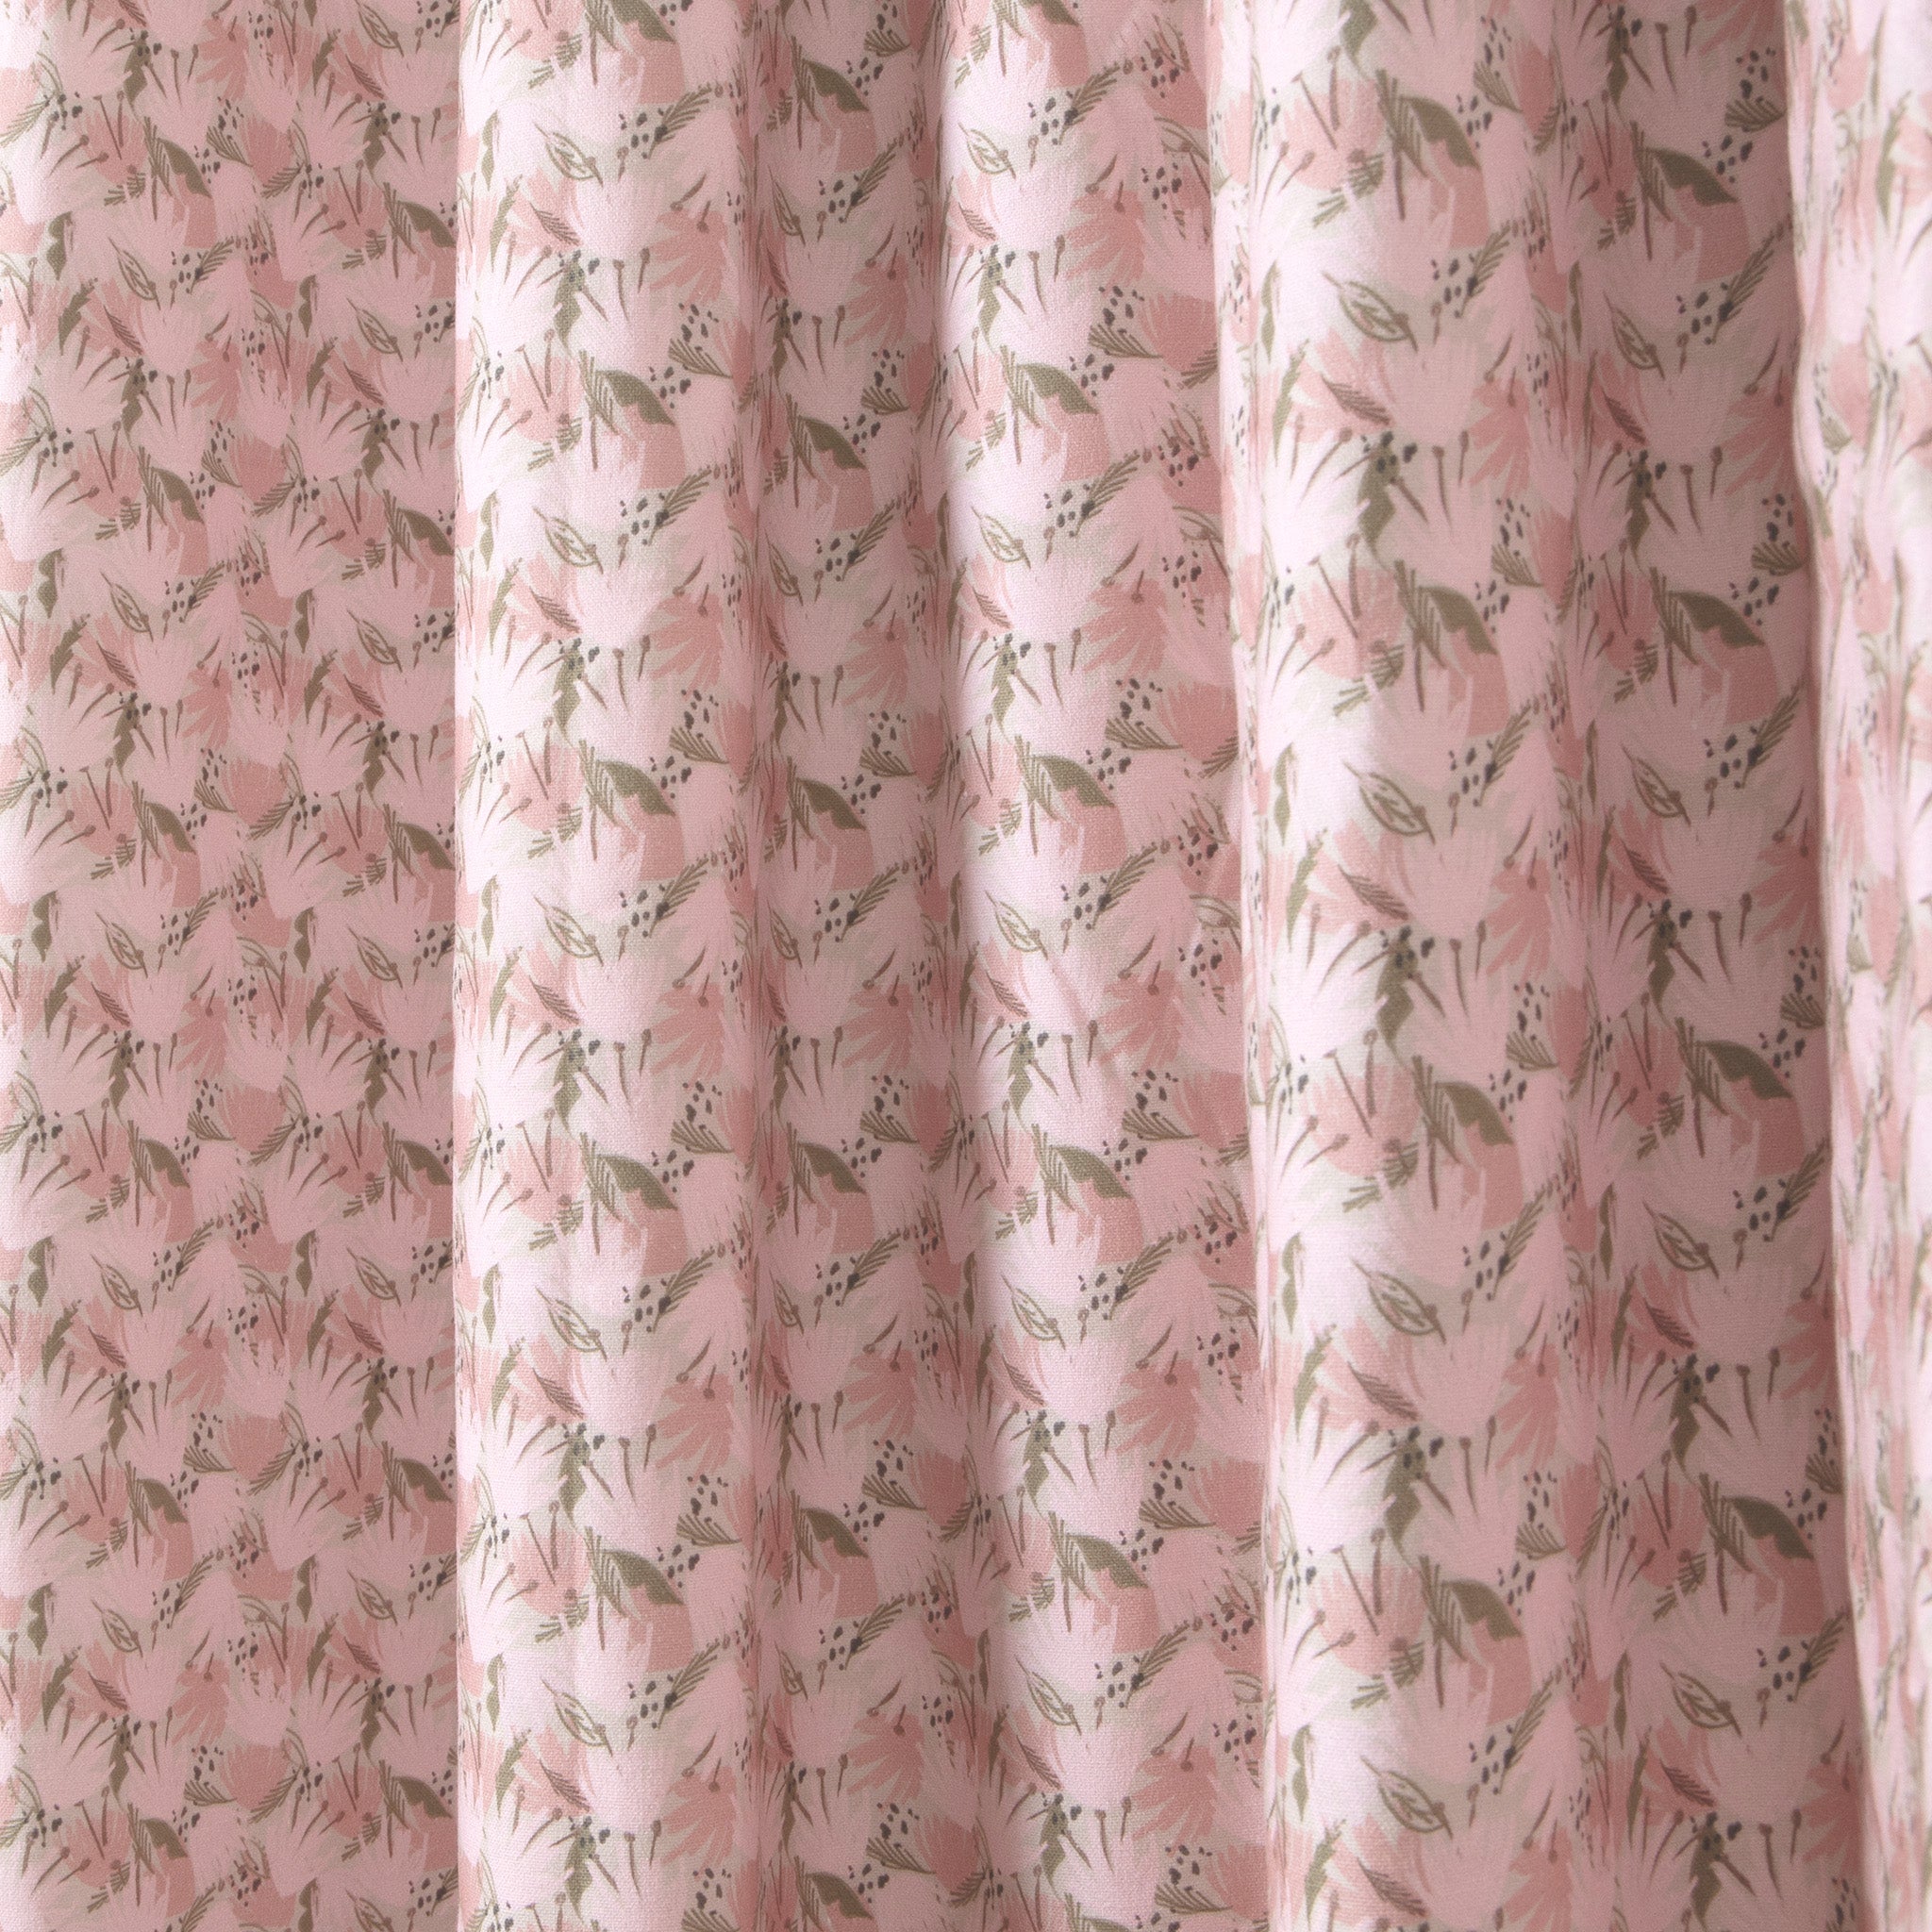 Pink Floral Printed Curtain Close-Up 